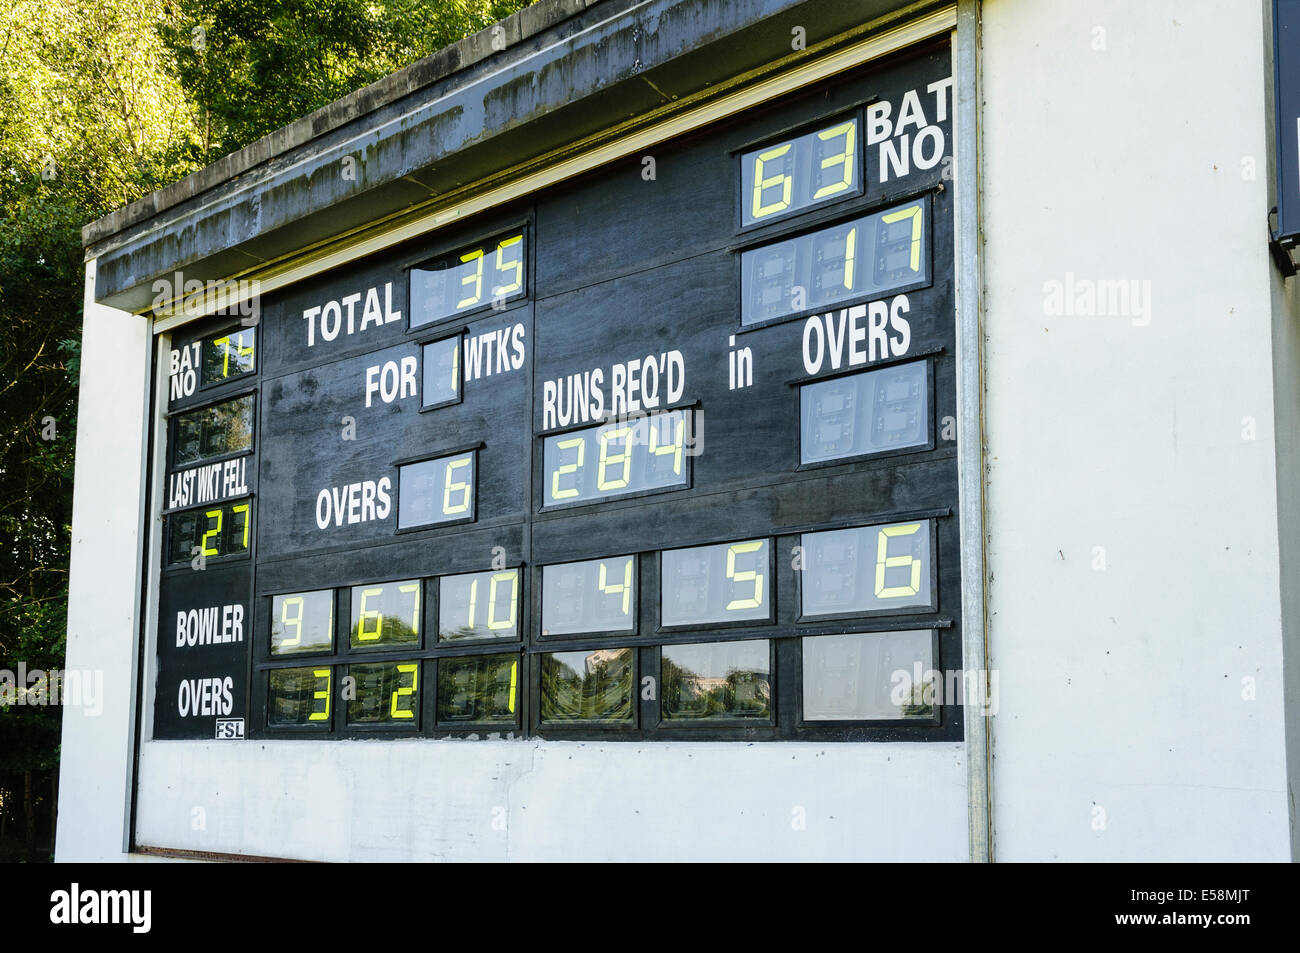 Cricket scoreboard showing the current score and number of overs Credit:  Stephen Barnes/Alamy Live News Stock Photo